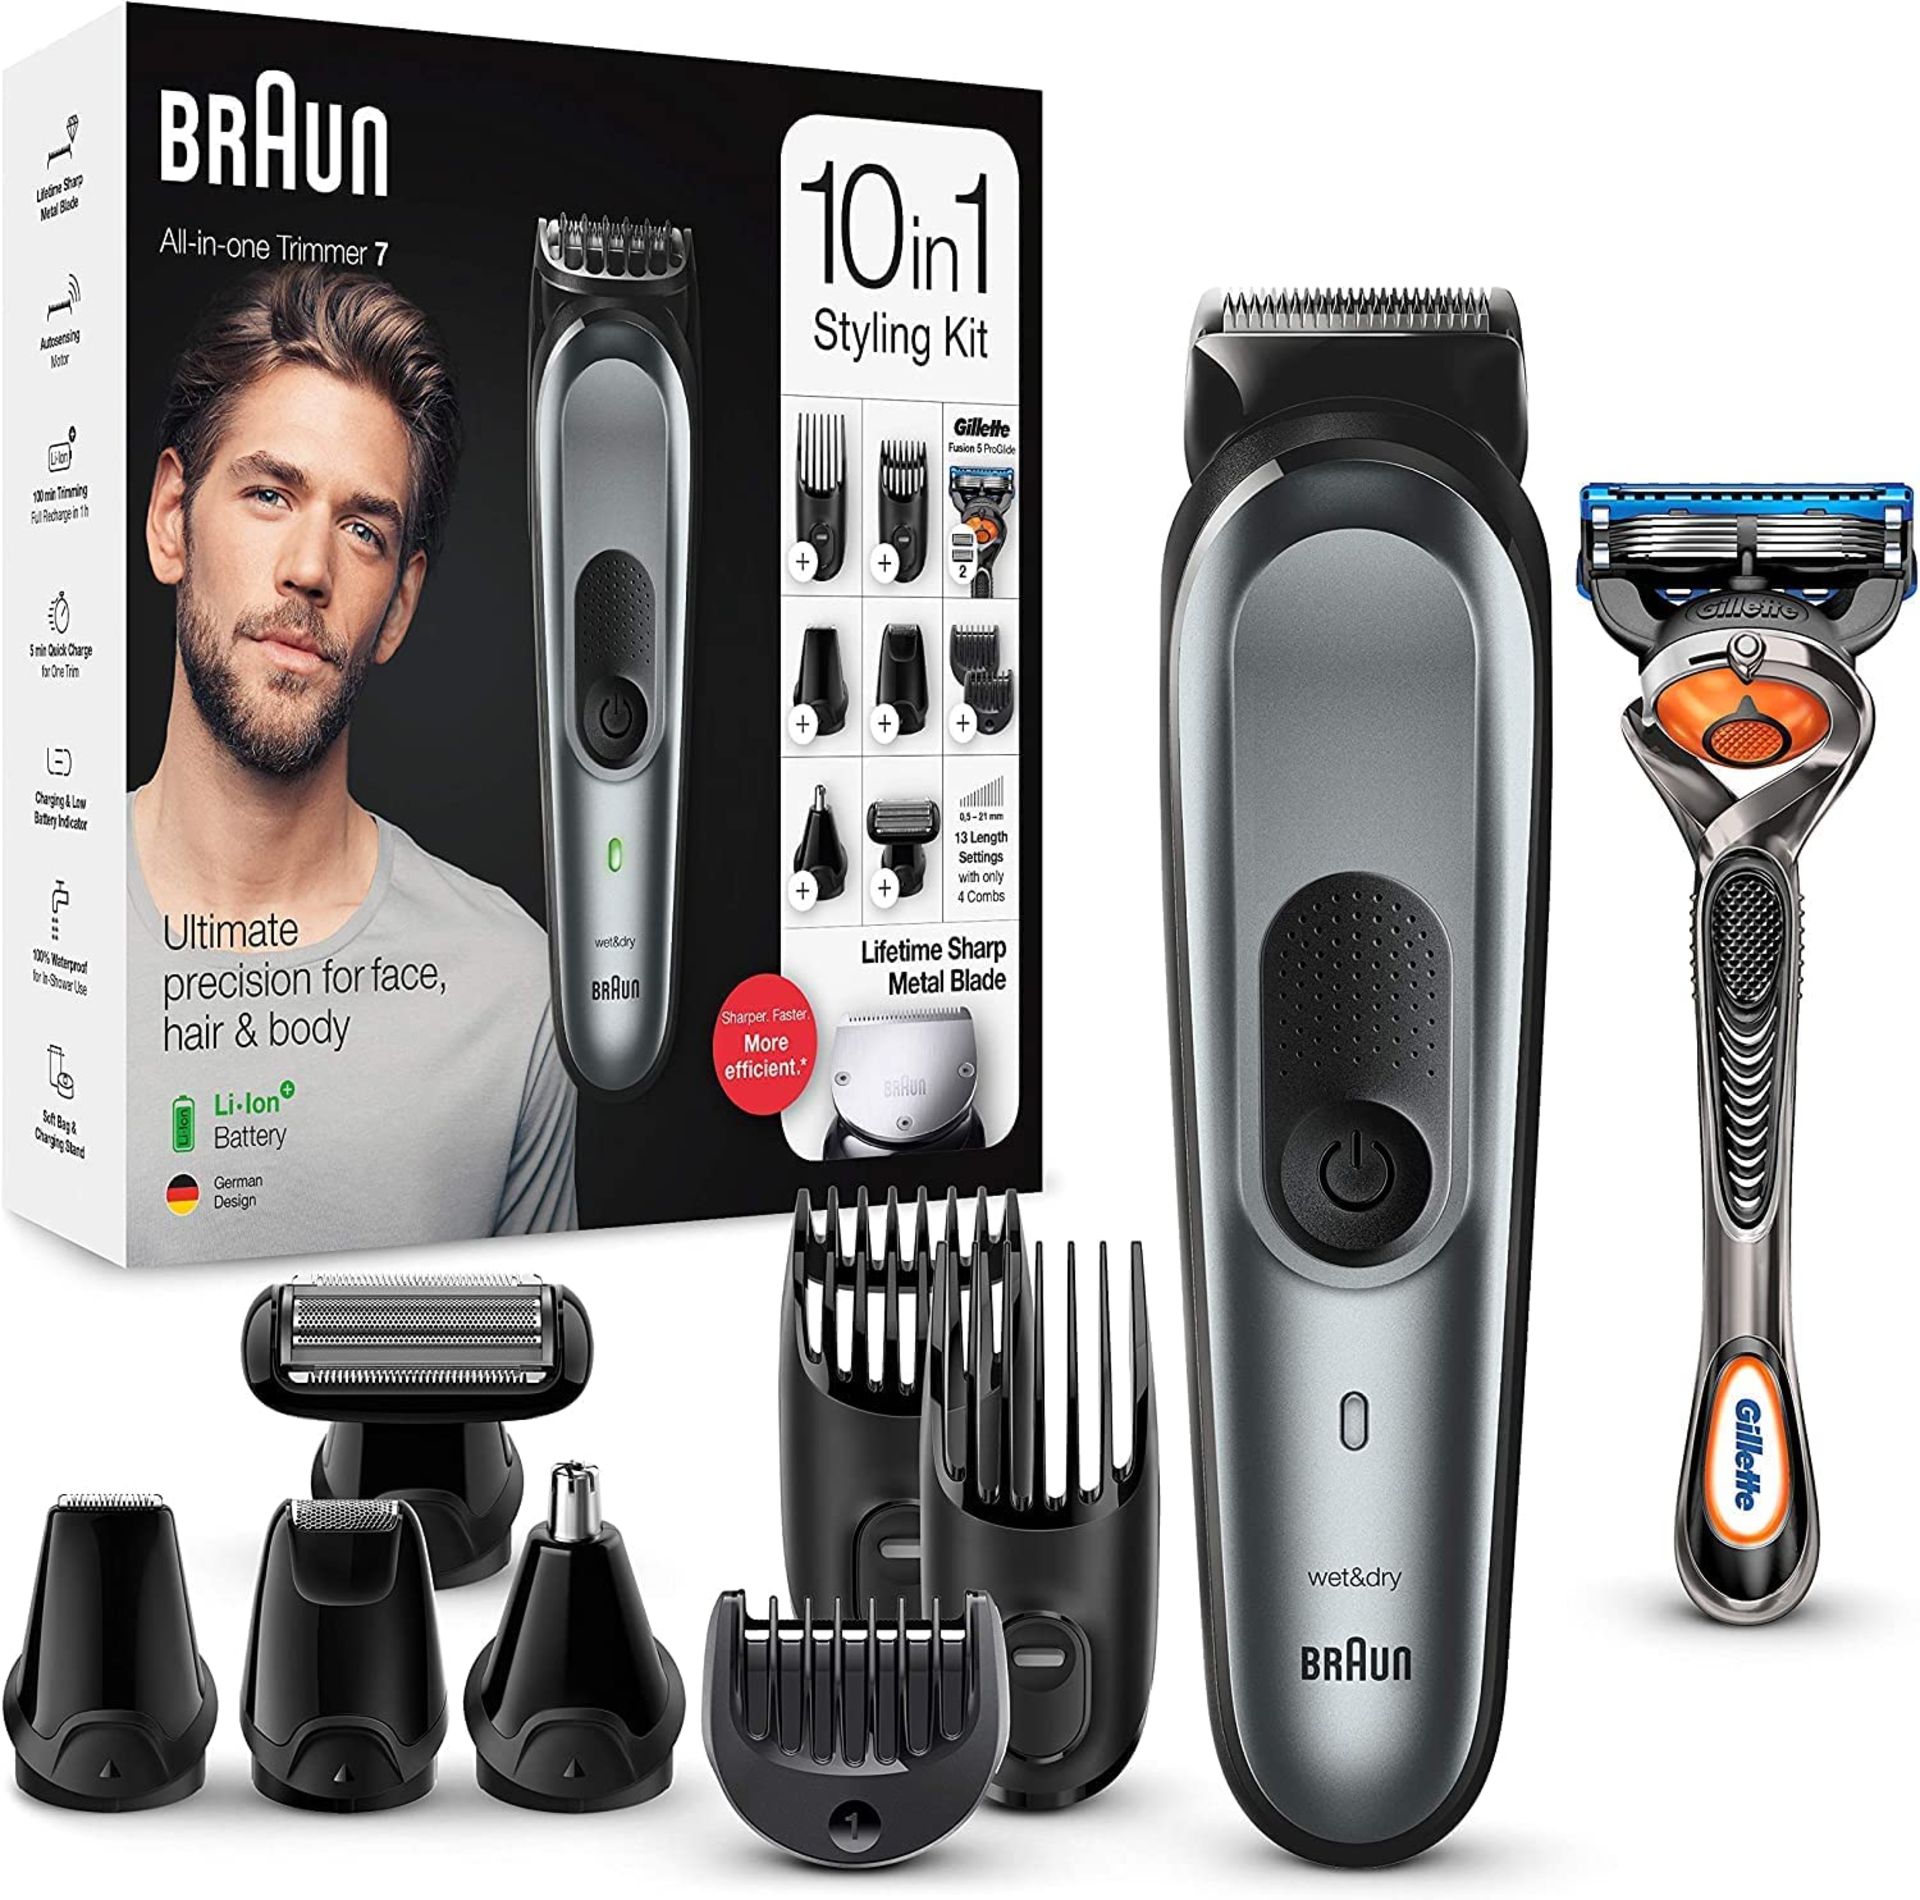 Braun 10-in-1 All-in-one Trimmer 7 MGK7221, Beard Trimmer for Men, Hair Clipper and Body Groomer wit